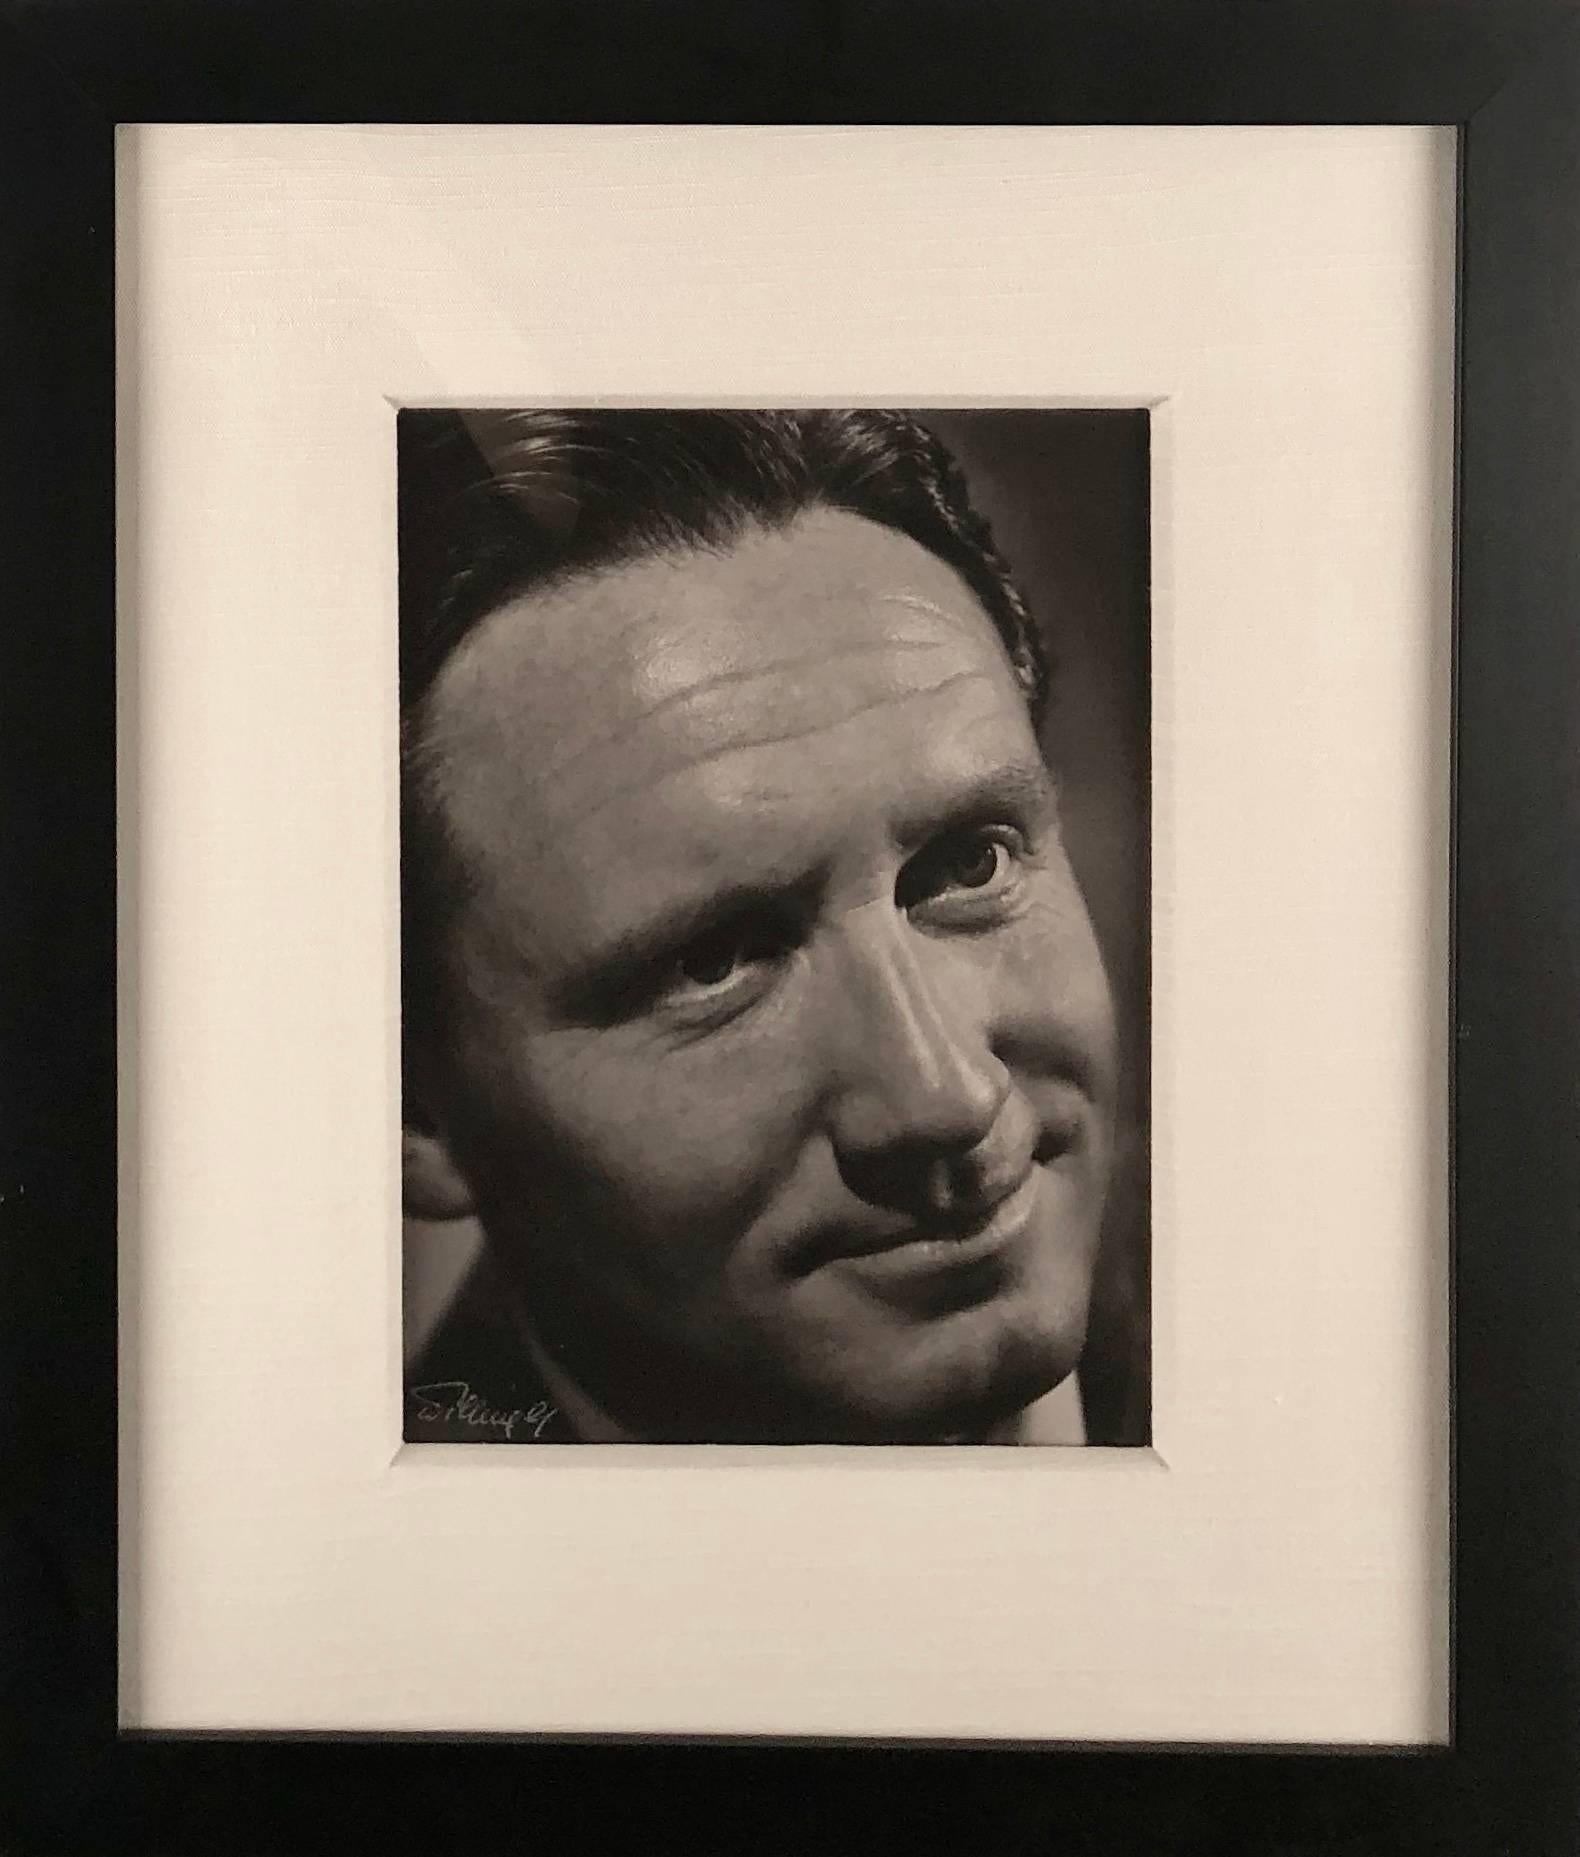 This piece is an original photograph from the original negative, shot by Laszlo Willinger in the 1930's and printed at a later date.  It depicts Spencer Tracey, who was an American actor, noted for his natural style and versatility. One of the major